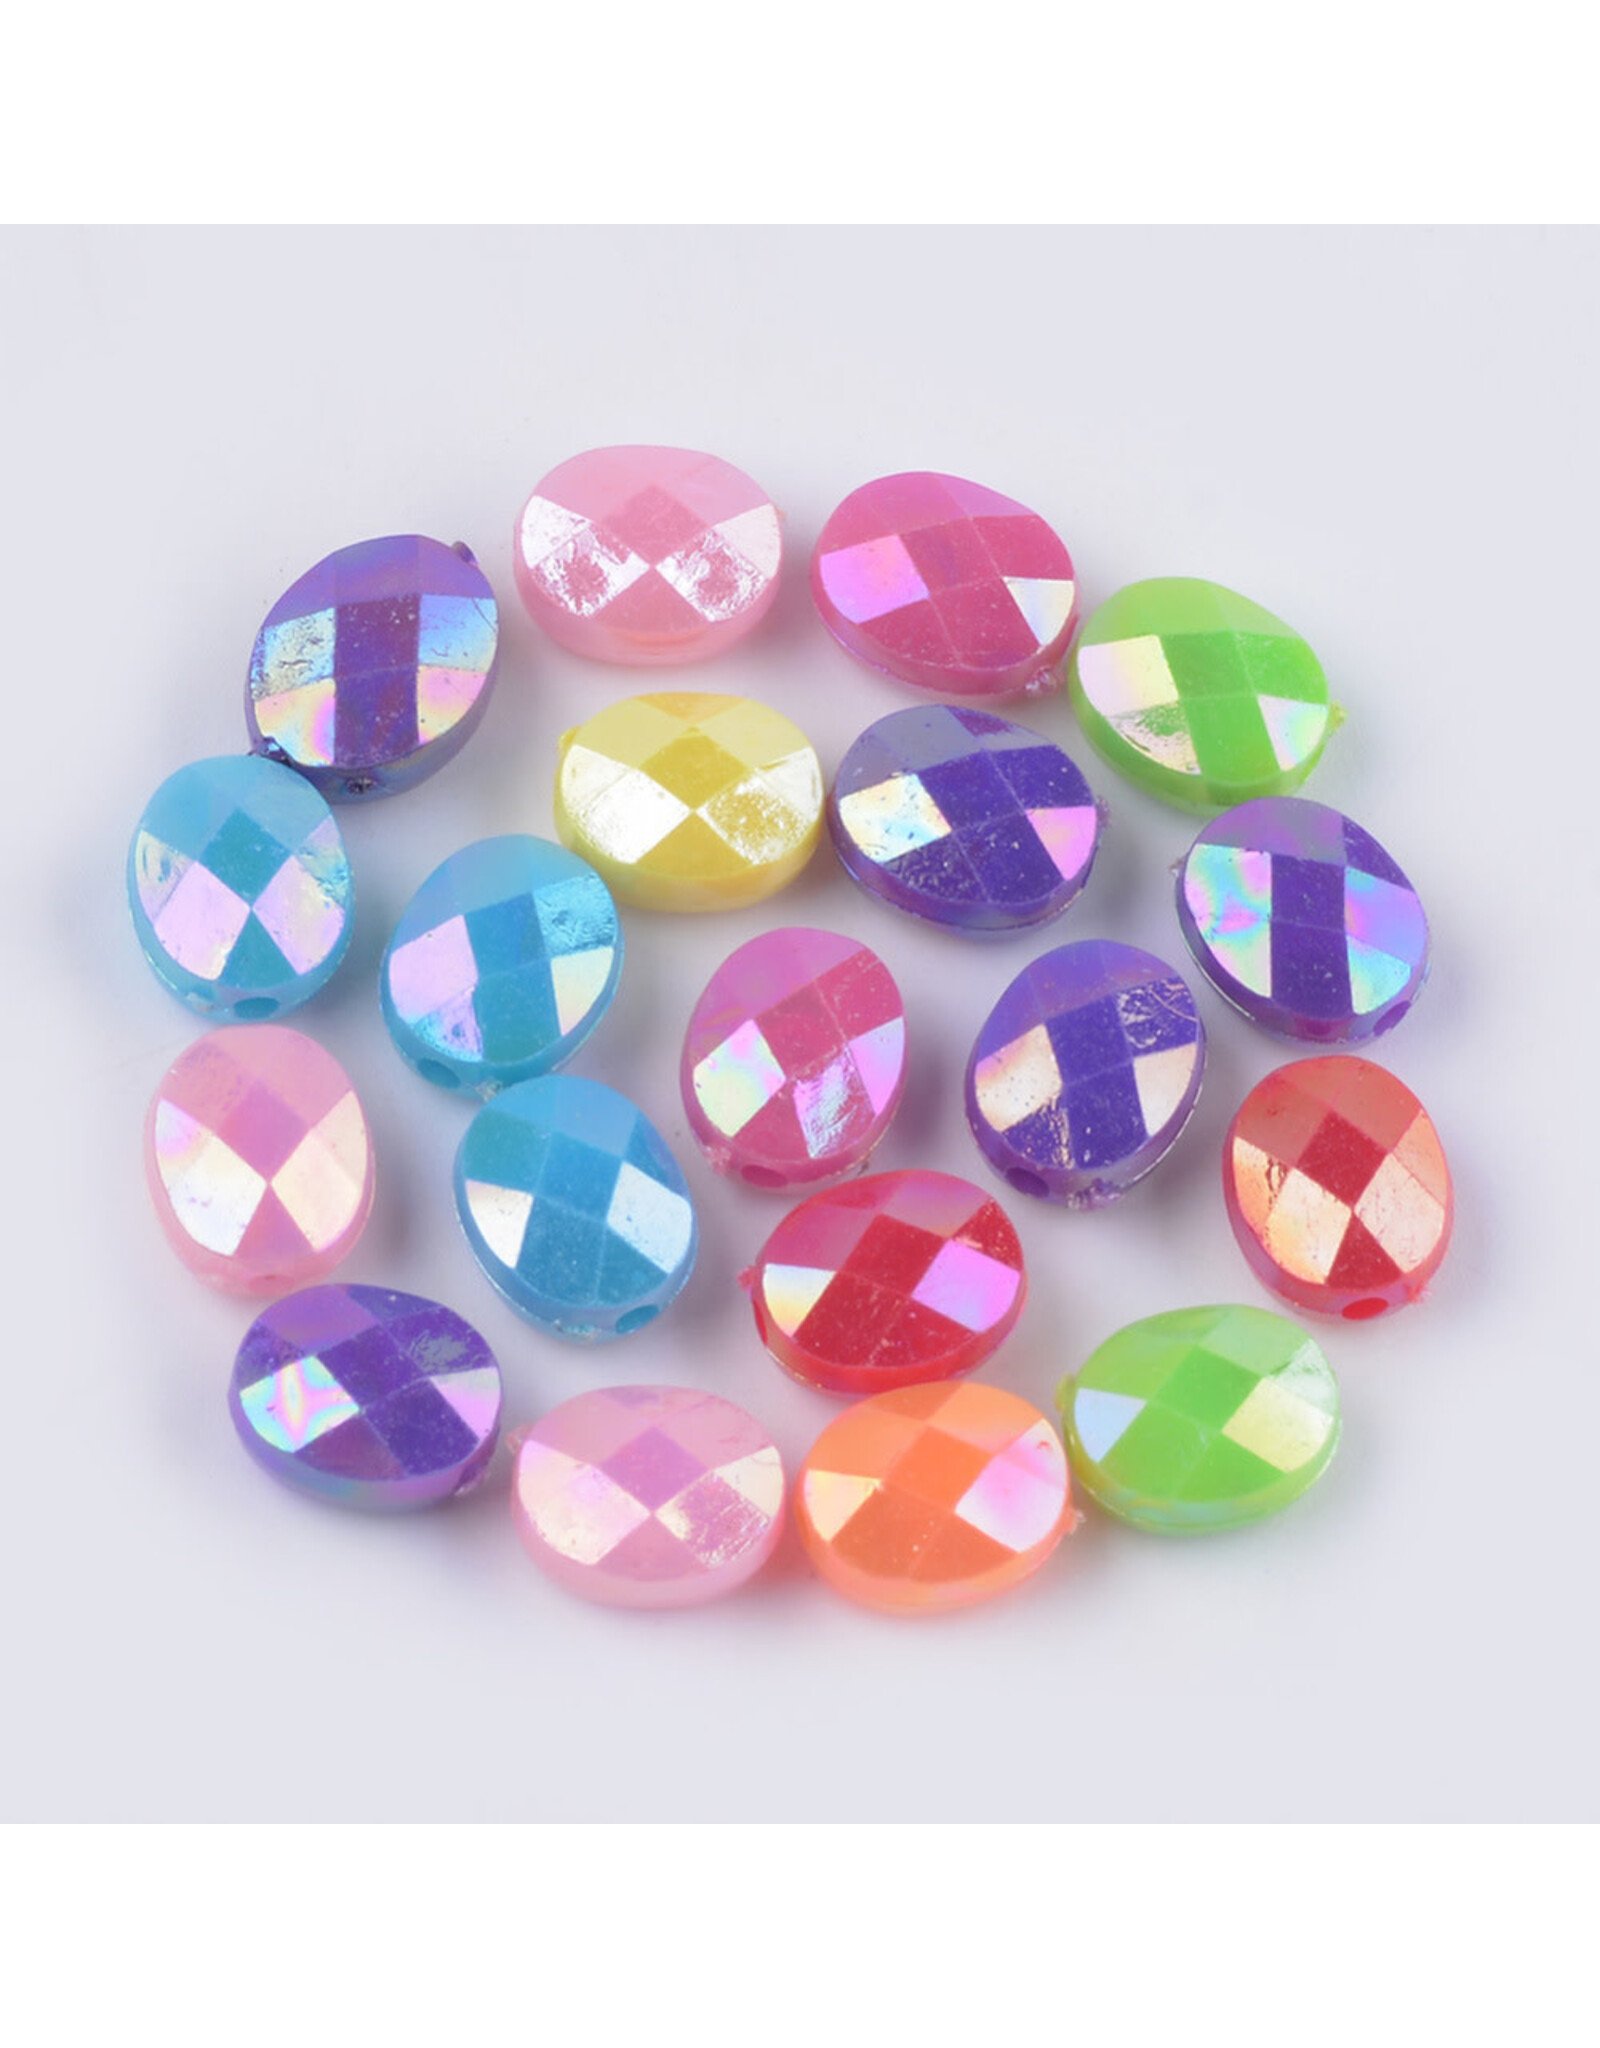 10x8mm Acrylic Faceted Oval  Random Assorted Colours x100